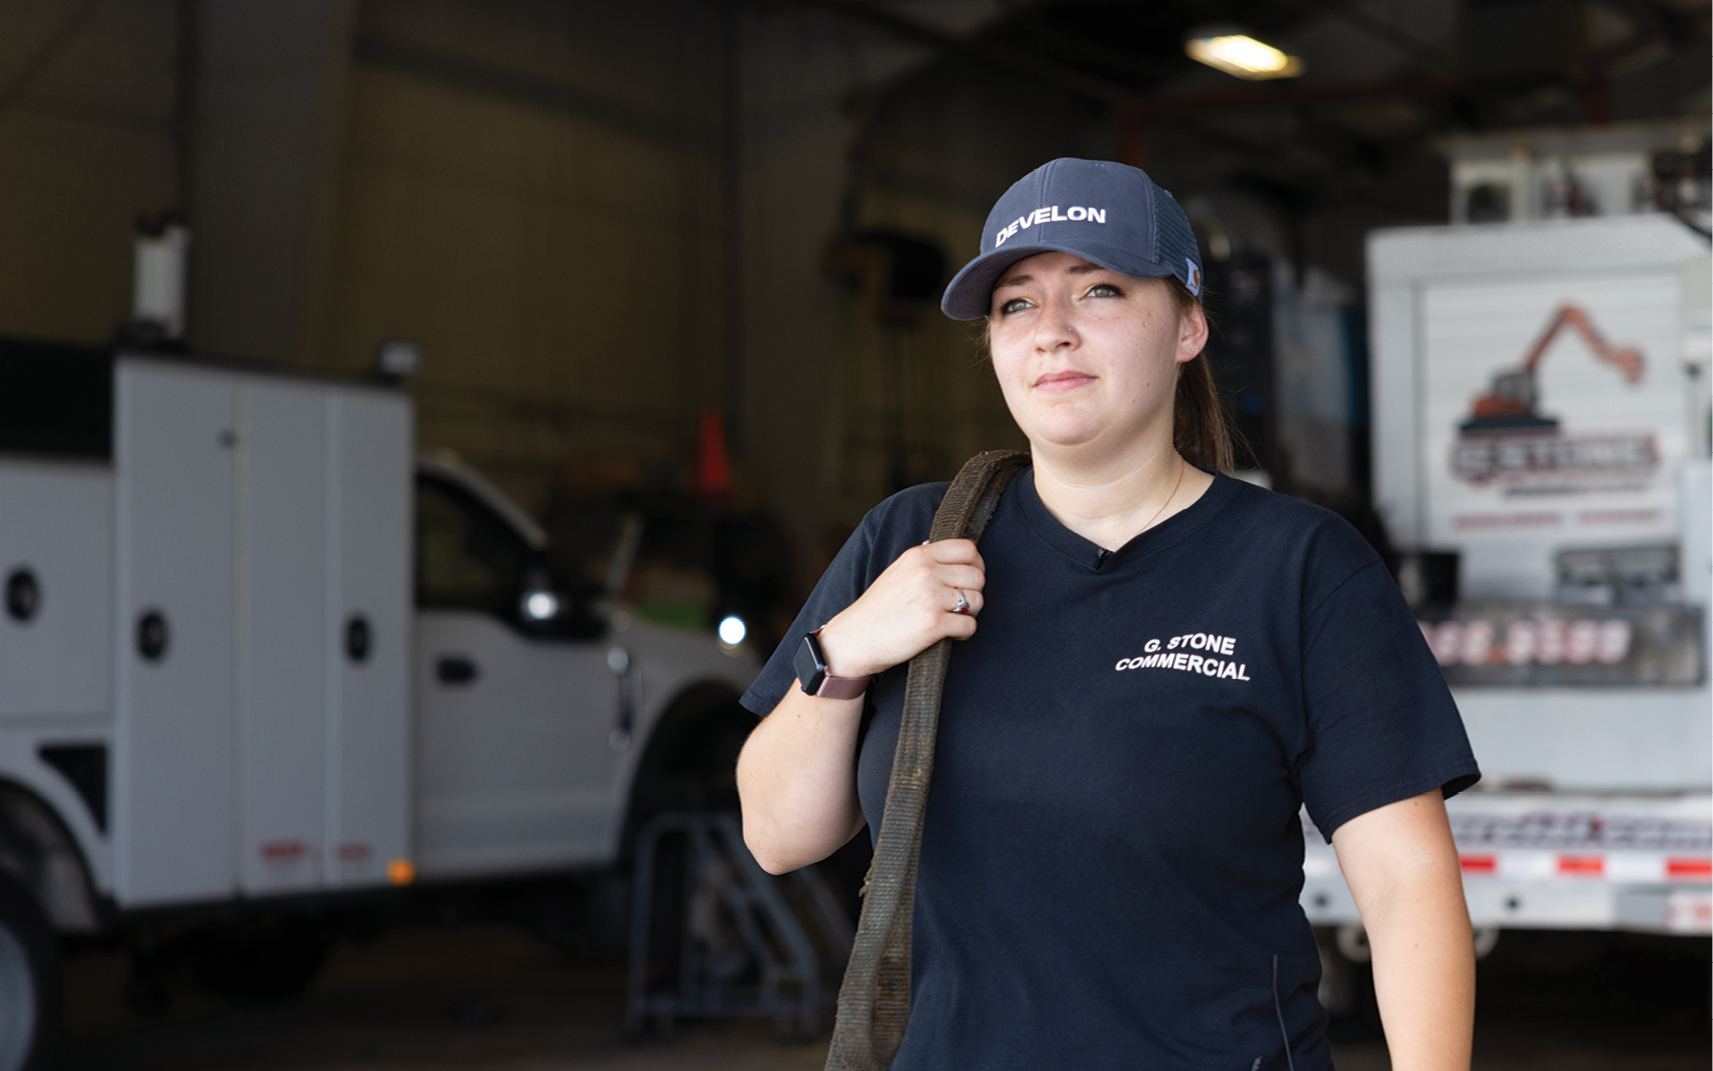 Emily Loso, a service, parts and warranty specialist at G. Stone Commercial.